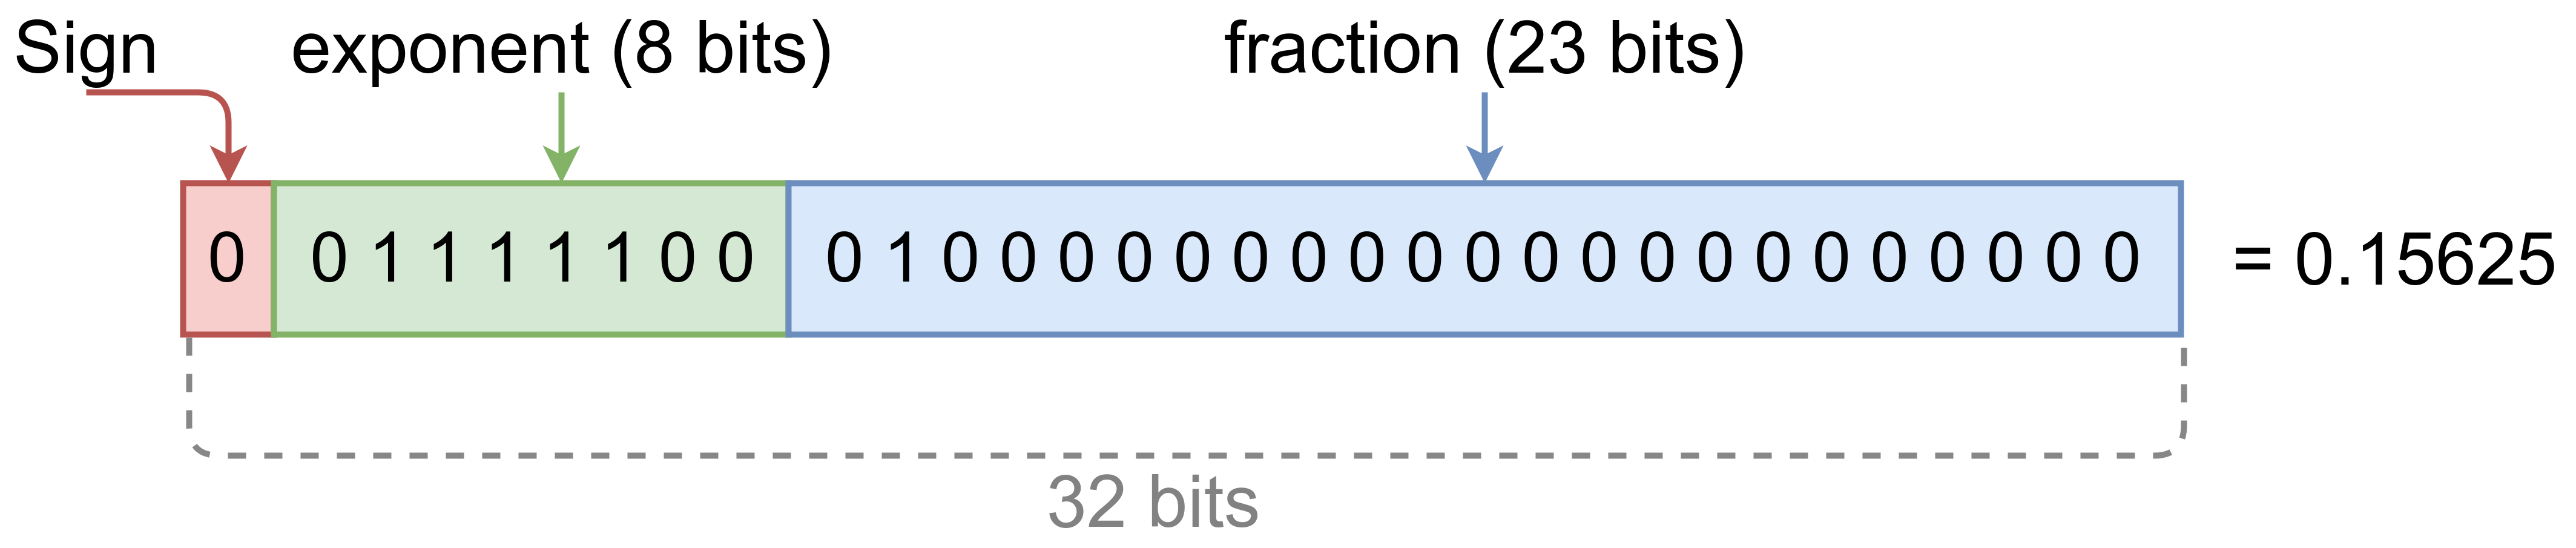 32 bits standard floating-point number binary encoding. Source: [Wikipedia](https://en.wikipedia.org/wiki/Single-precision_floating-point_format)